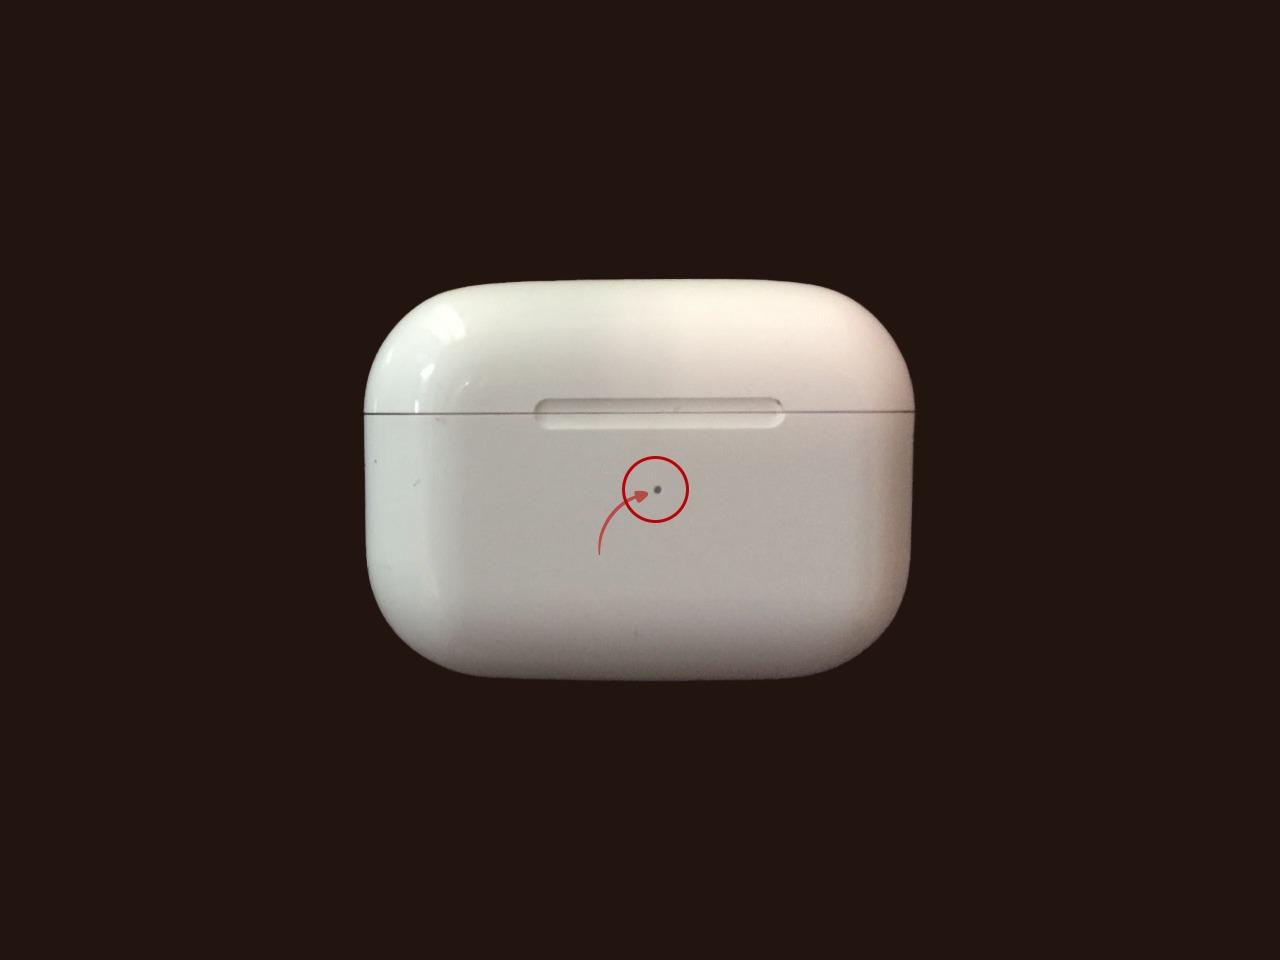 delicacy foul domestic How to Connect AirPods to Lenovo Laptop